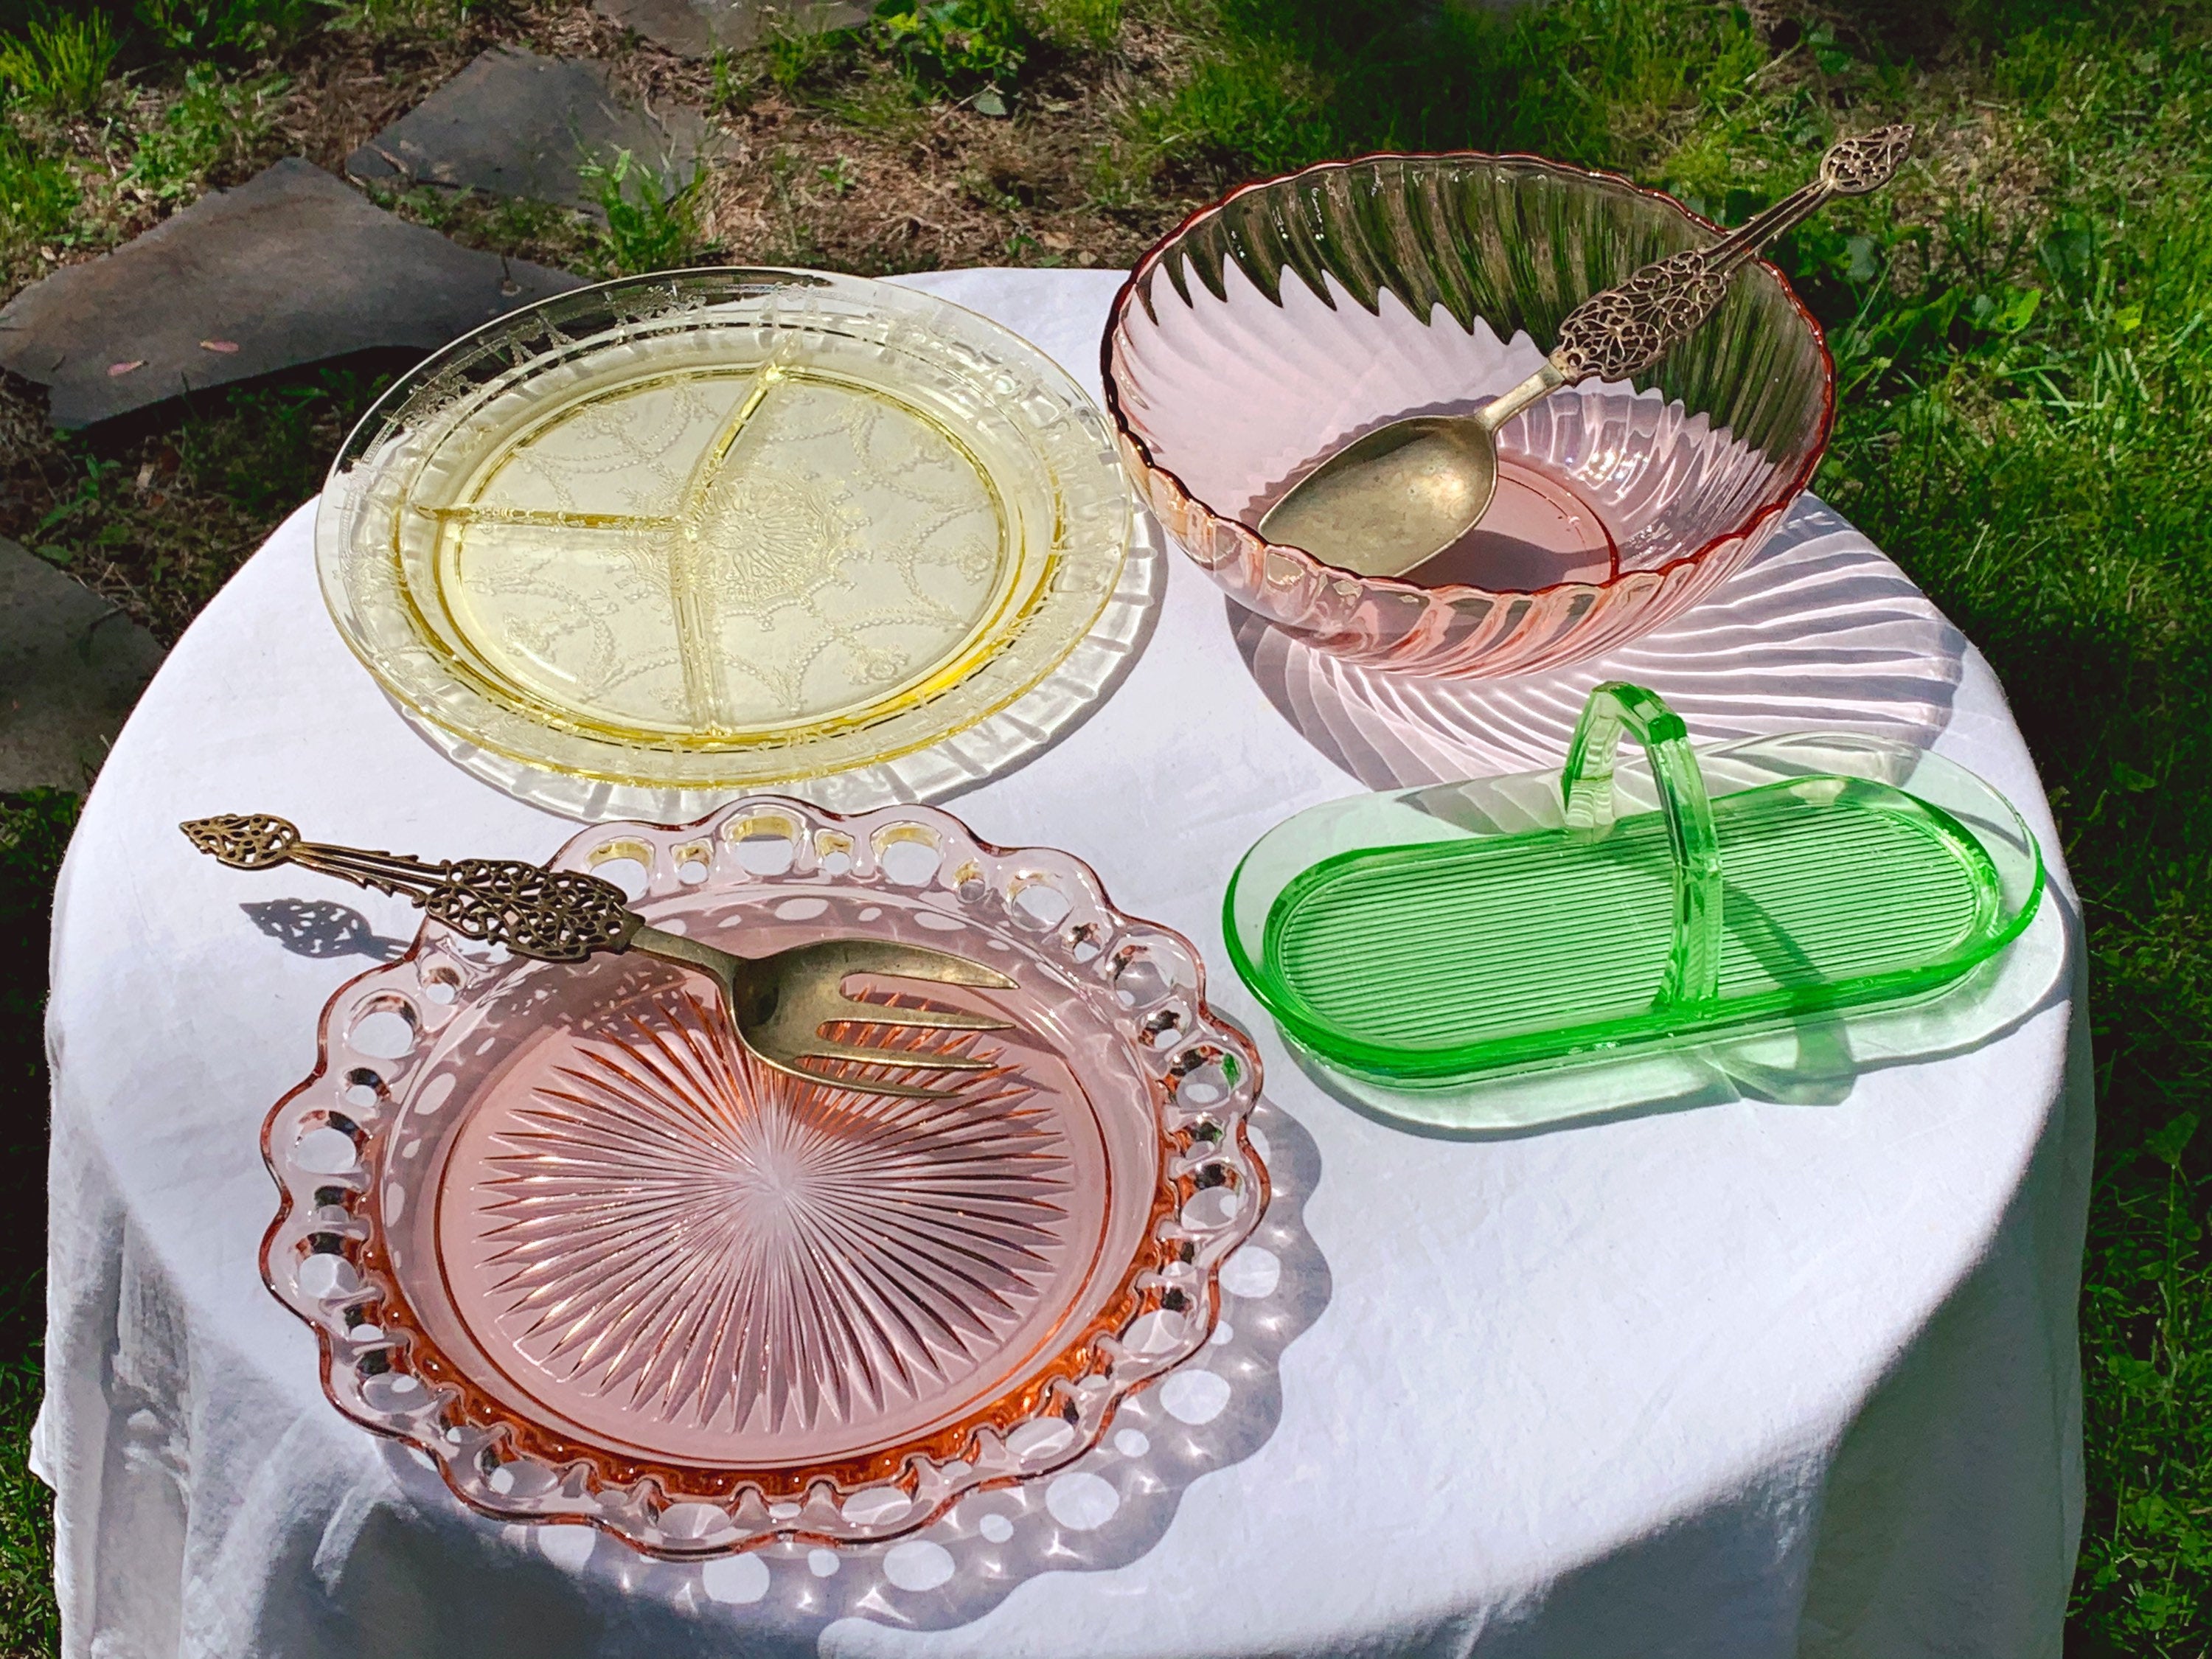 Variety of Vintage Depression Glass Serving Plate, Tray, Salad Bowl and Divided Grill Plate | Pink, Yellow, Green Uranium Glass Tableware